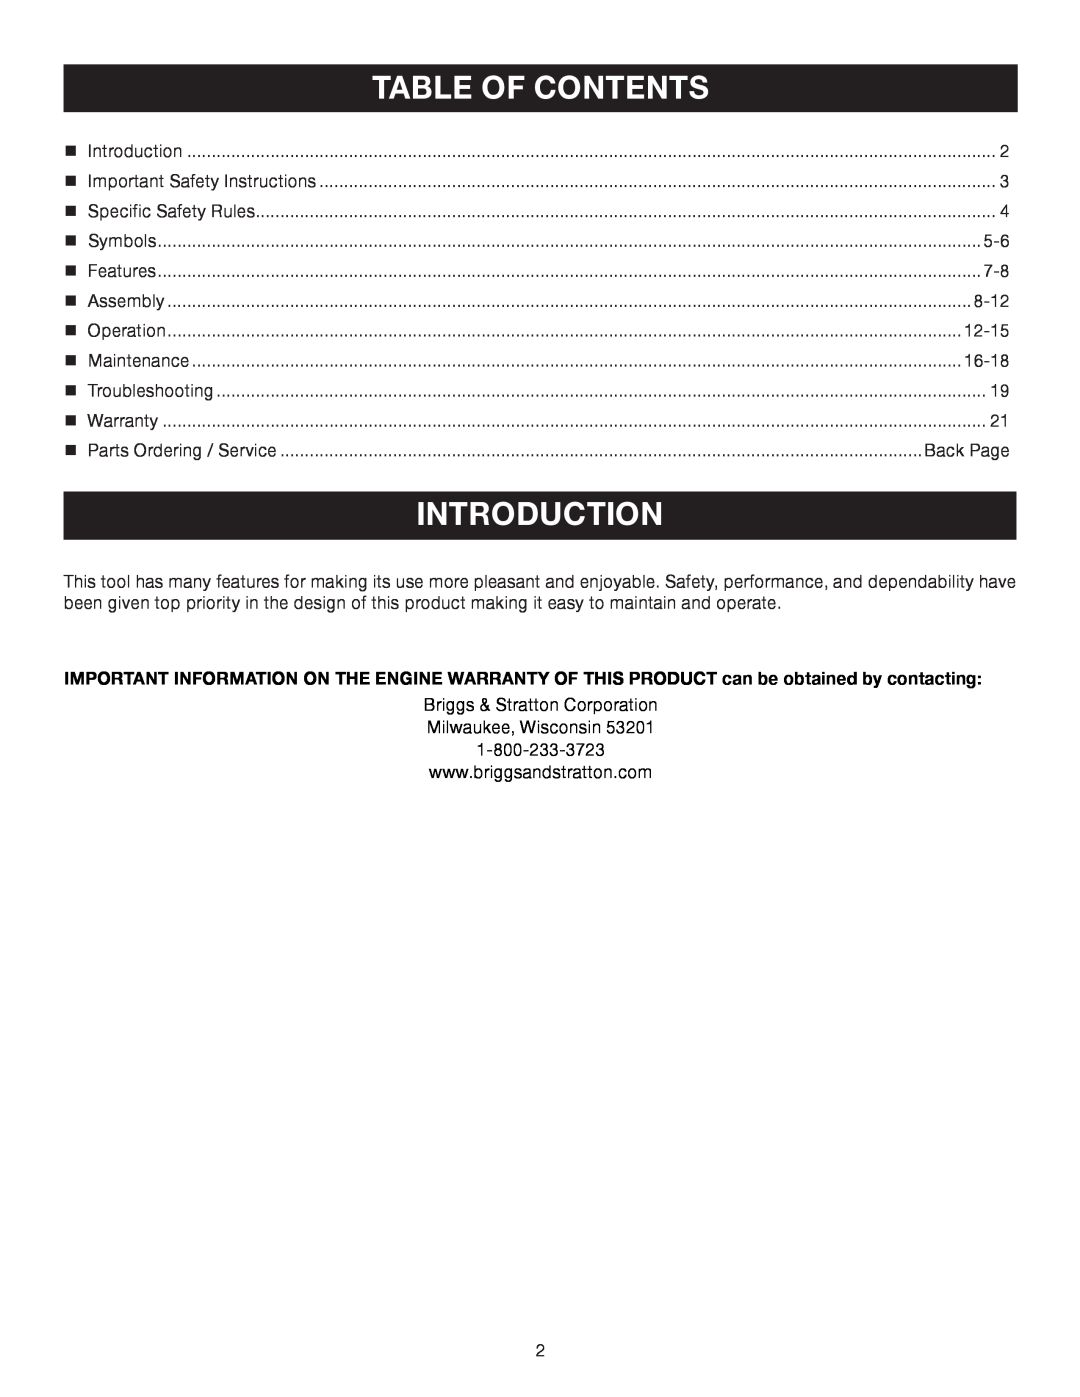 Briggs & Stratton HU80931, HU80530 manual Introduction, Table Of Contents 